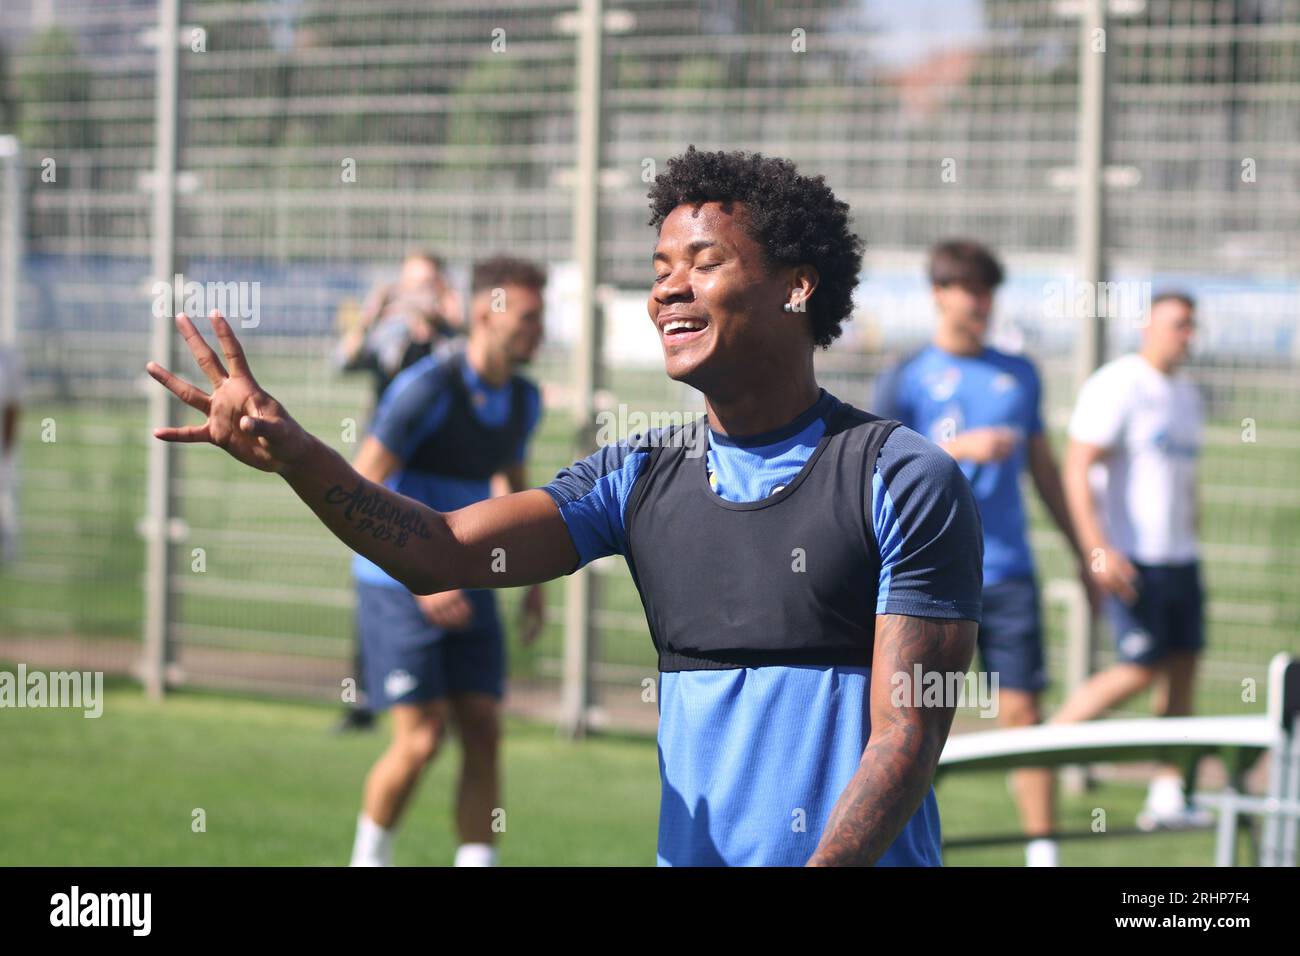 Wilmar Enrique Barrios Teran, known as Wilmar Barrios (5), a football player of Zenit Football Club at a training session open to the media in Saint Petersburg, before the match of the 5th round of the Russian Premier League, Spartak Moscow - Zenit Saint Petersburg. (Photo by Maksim Konstantinov / SOPA Images/Sipa USA) Stock Photo